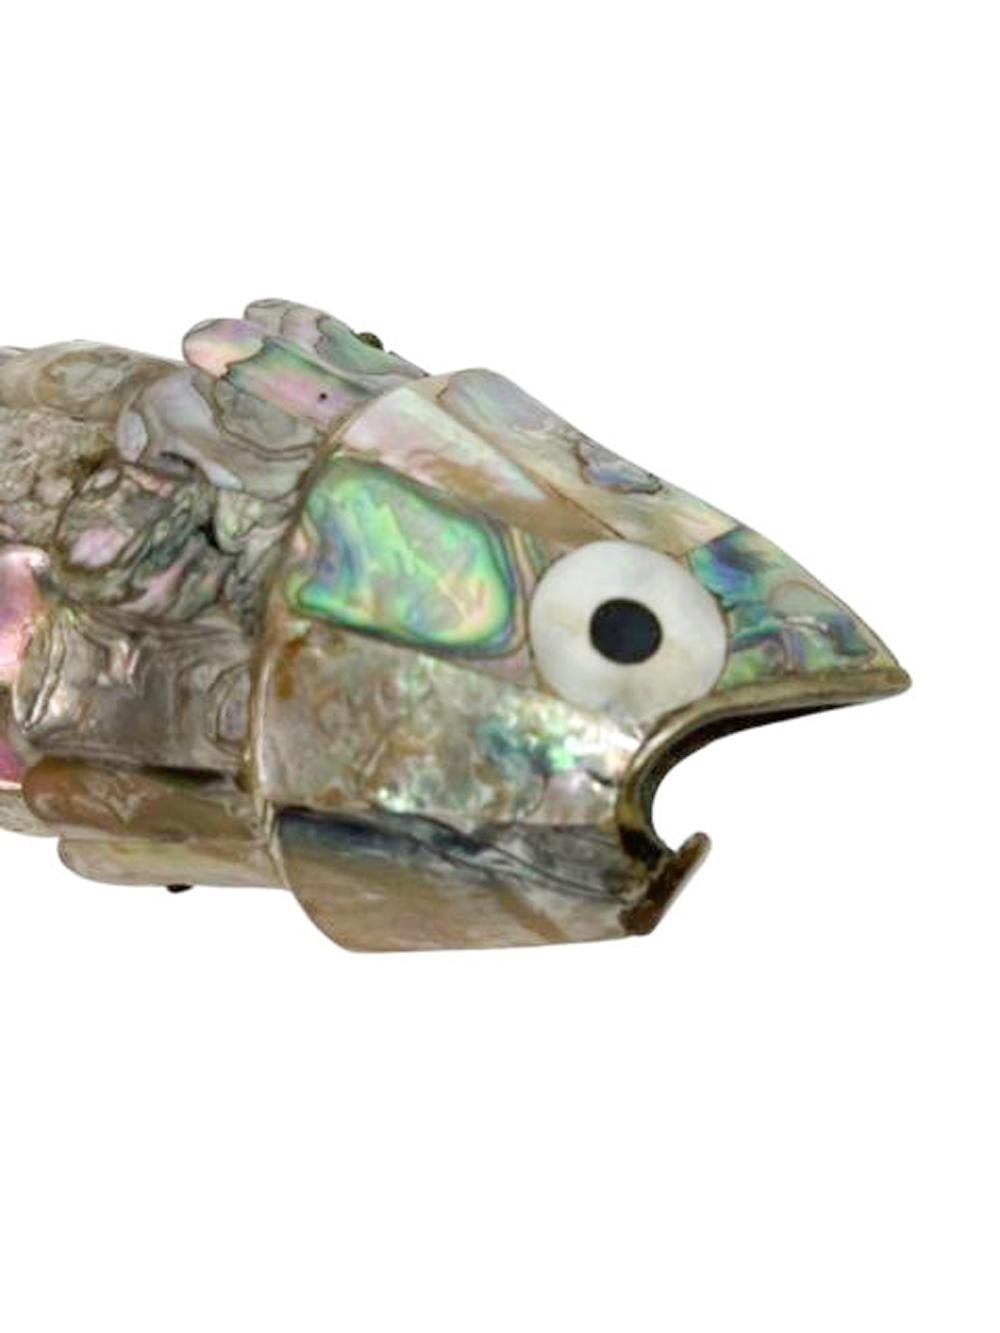 Silver Plate Mid-Century Modern Taxco Los Castillo Abalone Articulated Fish Bottle Opener